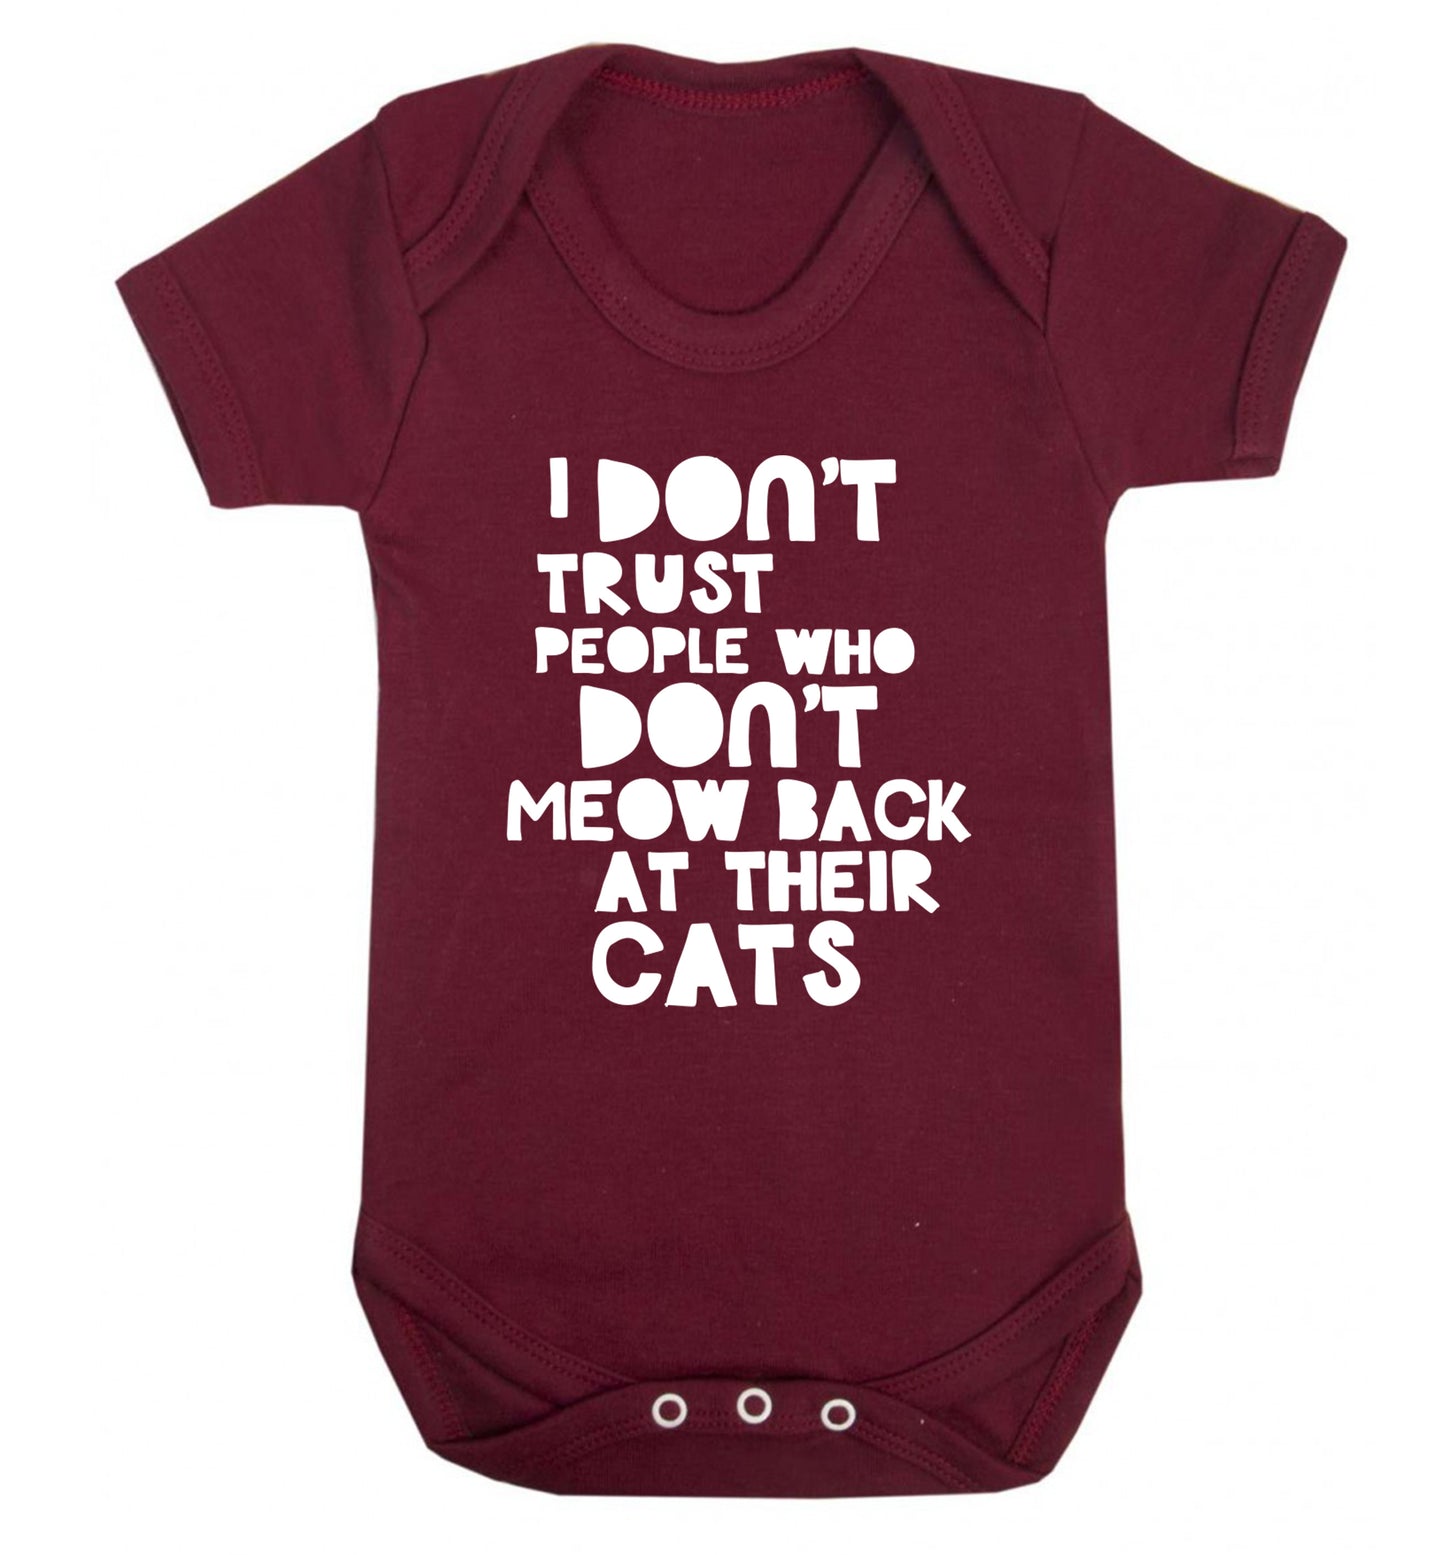 I don't trust people who don't meow back at their cats Baby Vest maroon 18-24 months